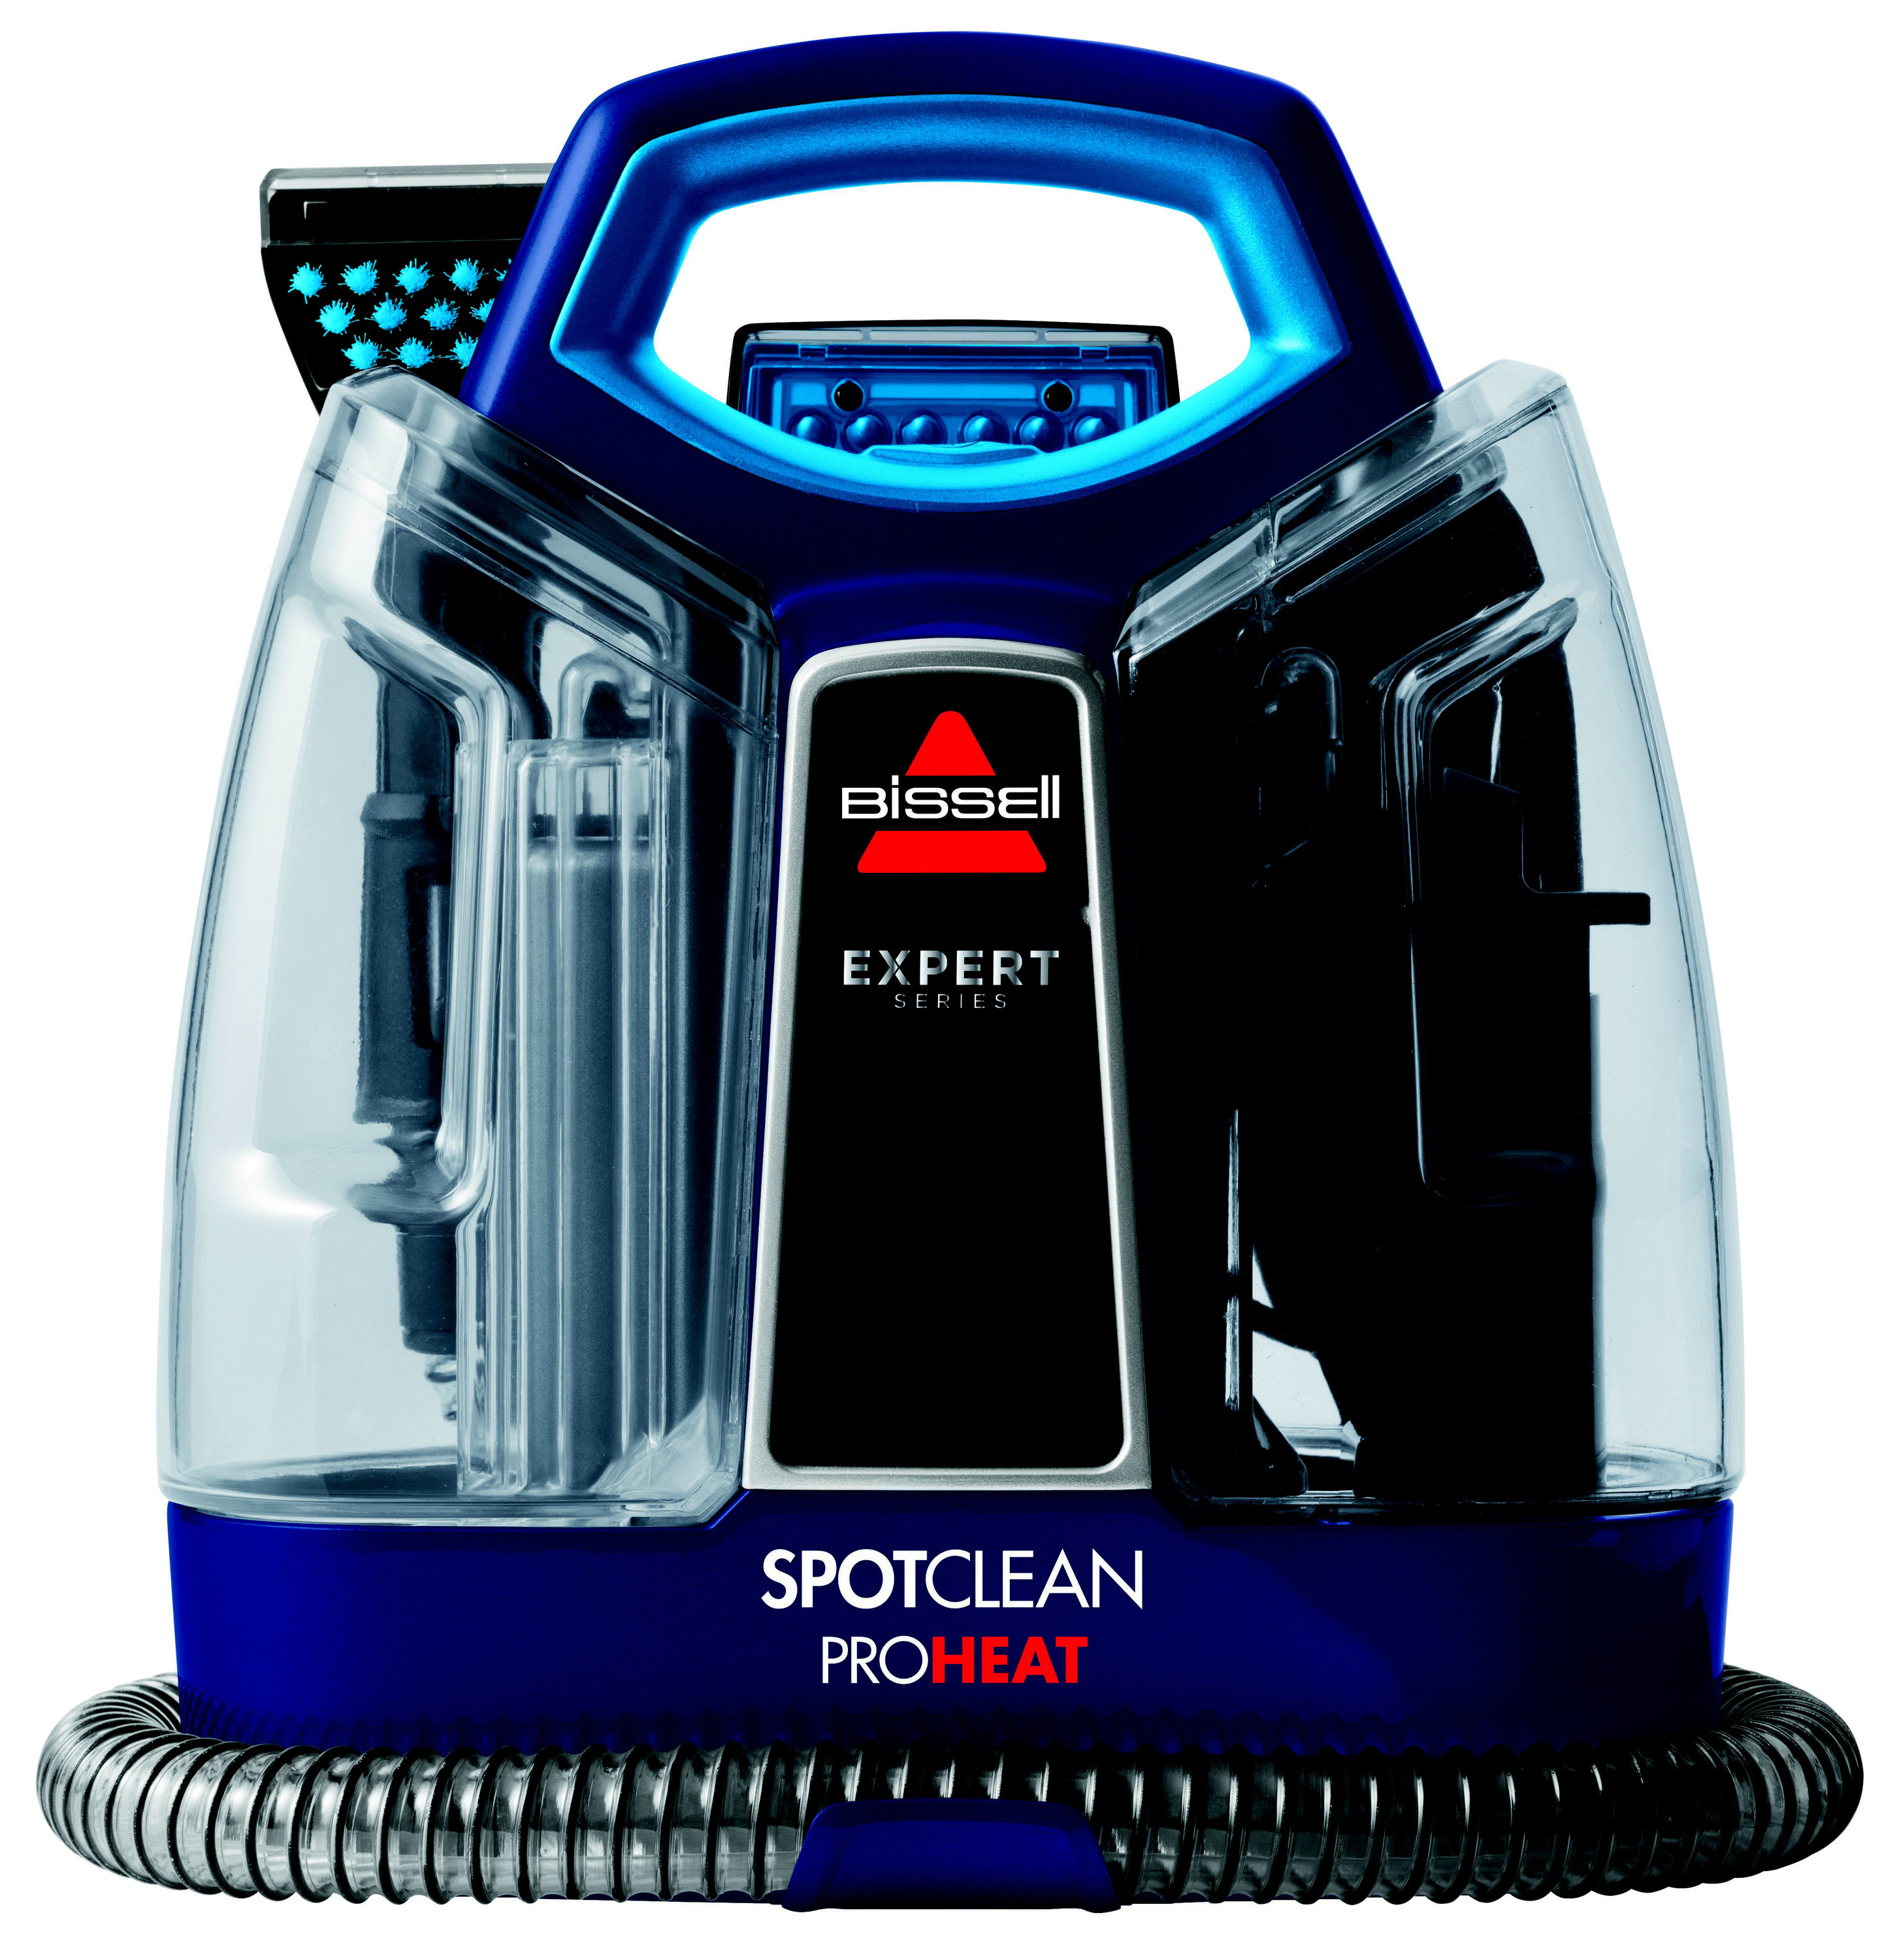 Best carpet cleaner deal: $30 off Bissel's SpotClean ProHeat carpet cleaner